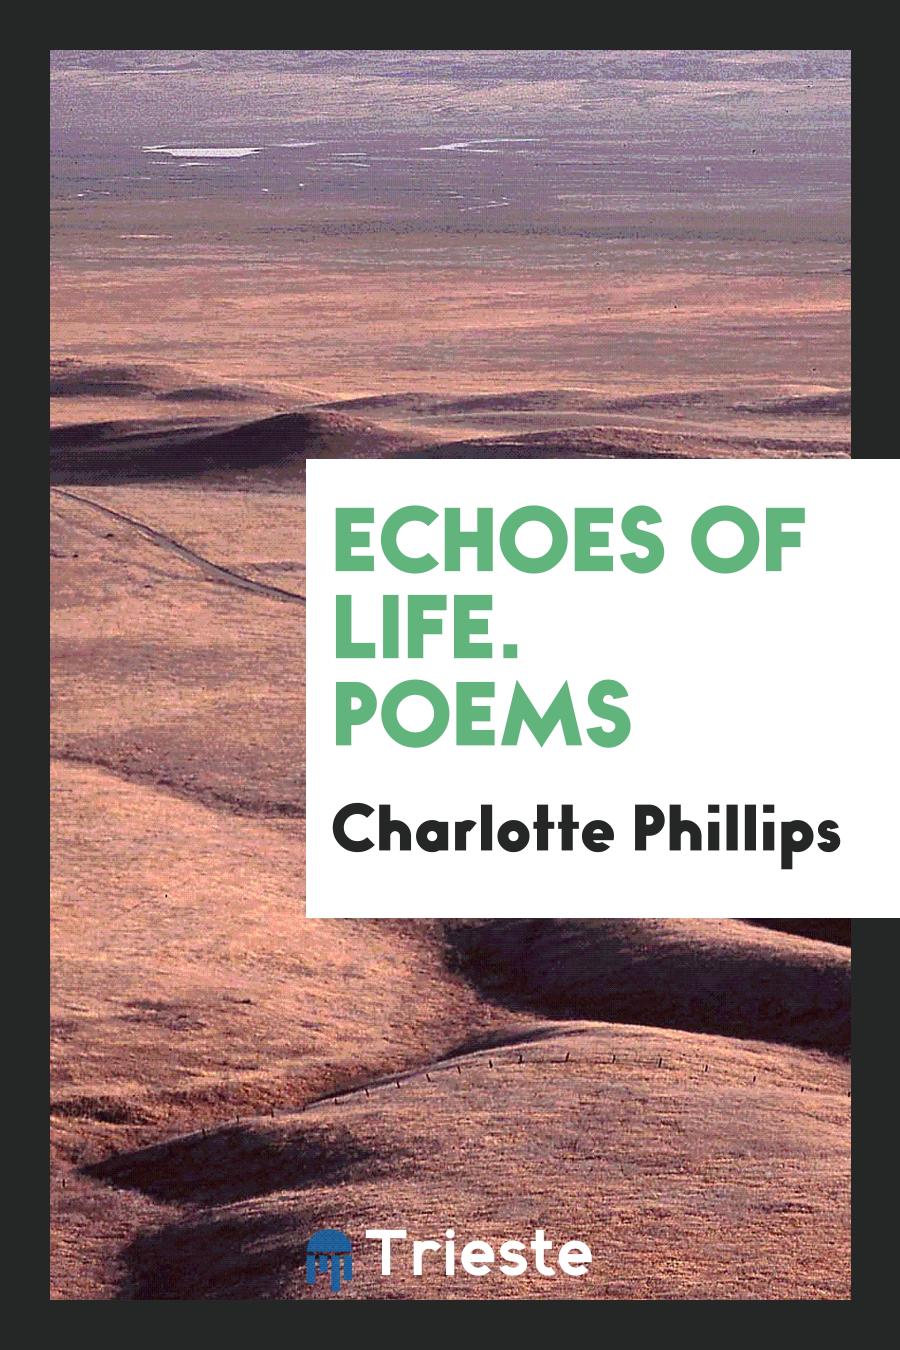 Echoes of Life. Poems